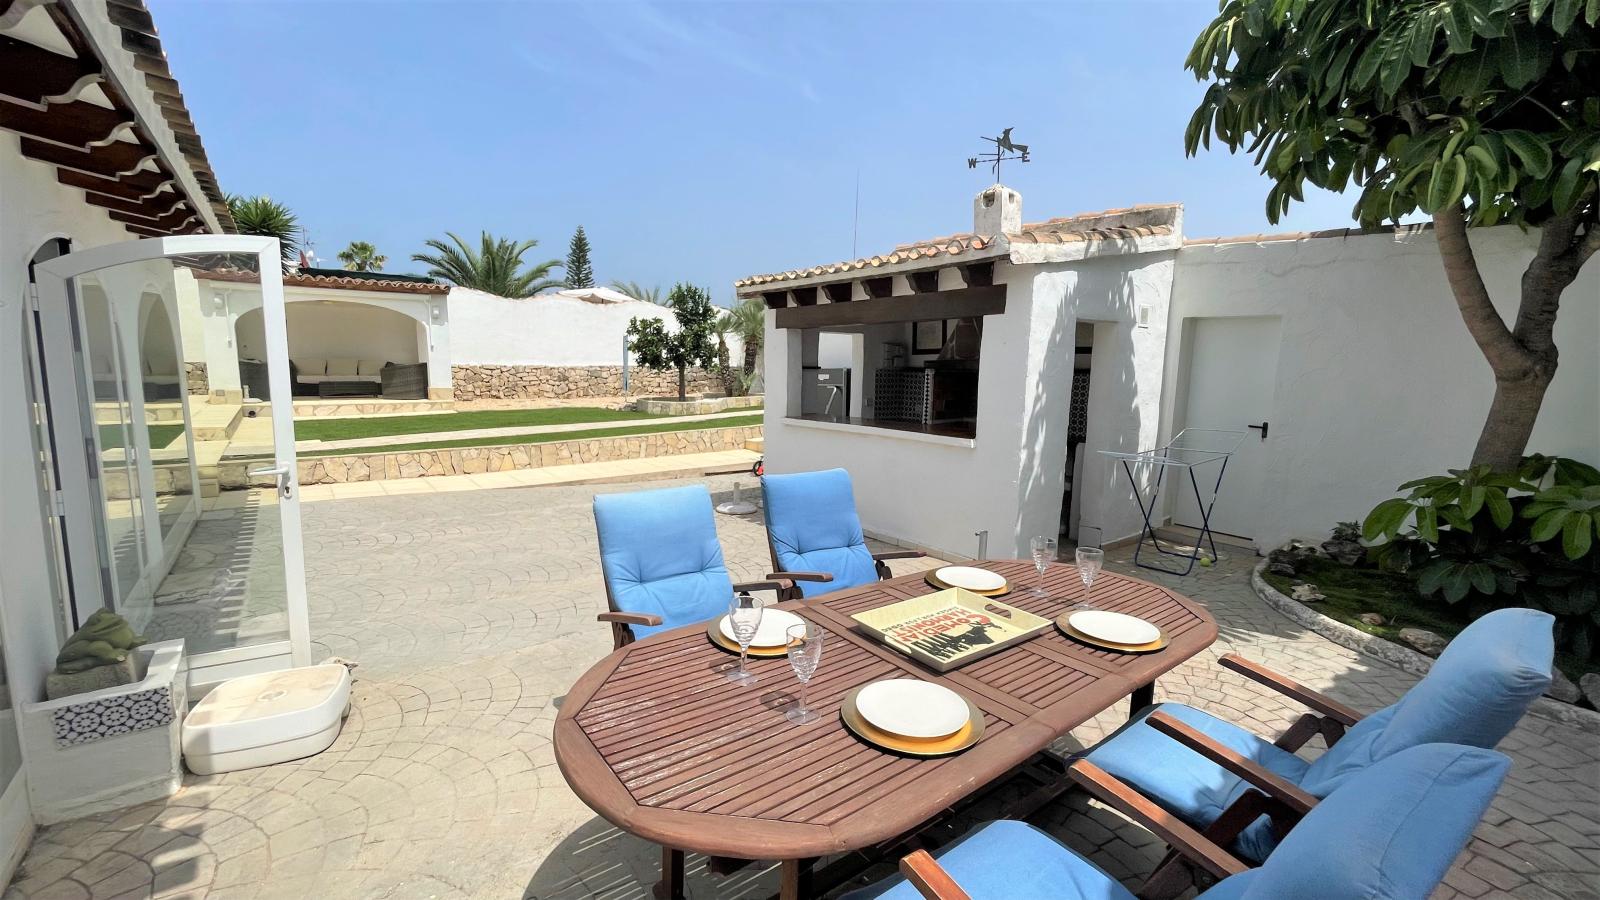 Fantastic villa on Monte Pego with all the extras: Flat plot, guest house, pool, photovoltaic, carport, winter garden, fitness room and much more!